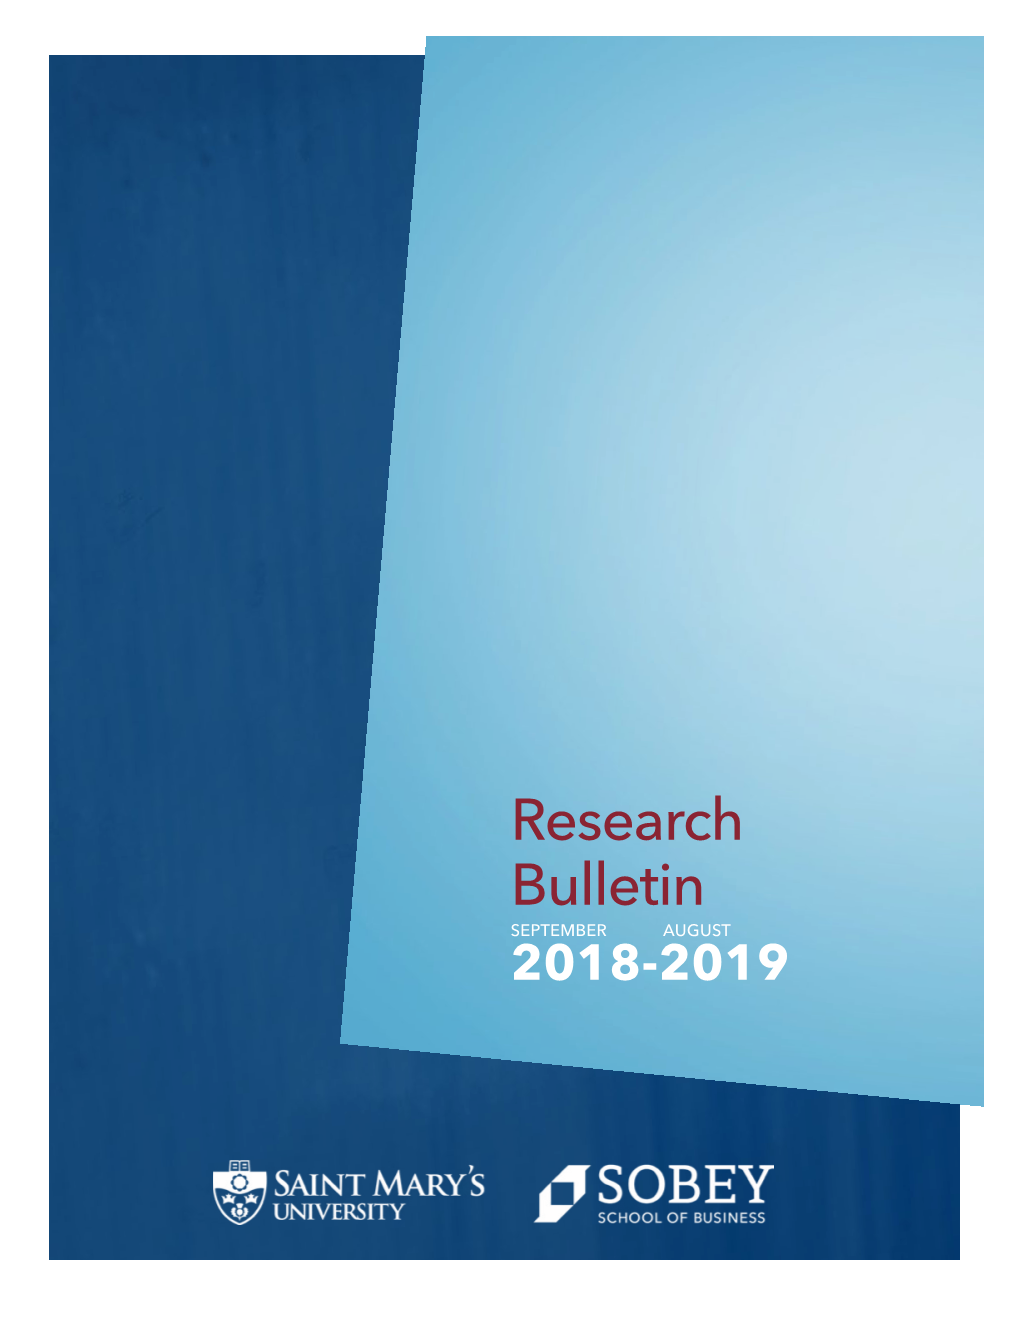 Download the 2018-2019 Research Bulletin